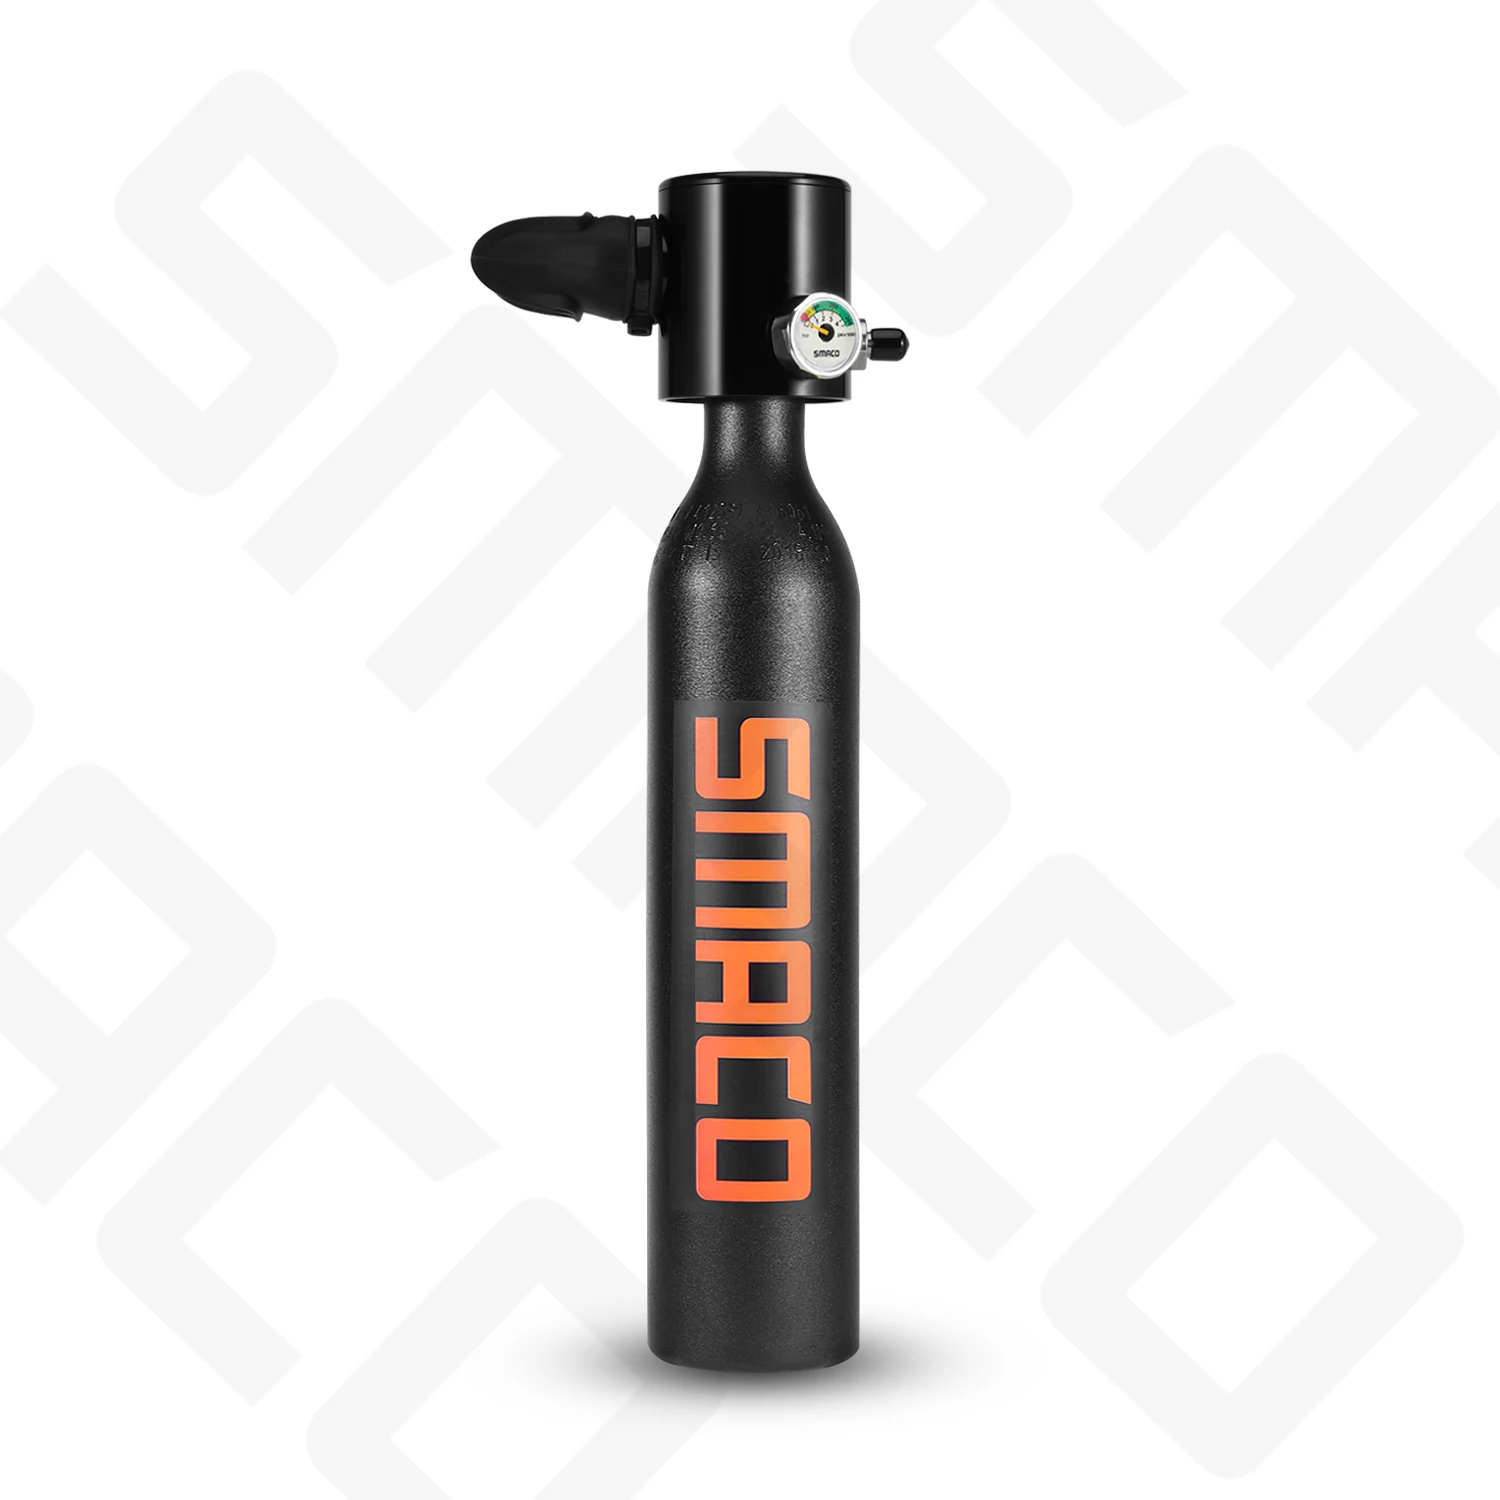 SMACO Diving Equipment oxygen cylinder set Mini scuba tank total freedom breath underwater for 5 à 10 minutes